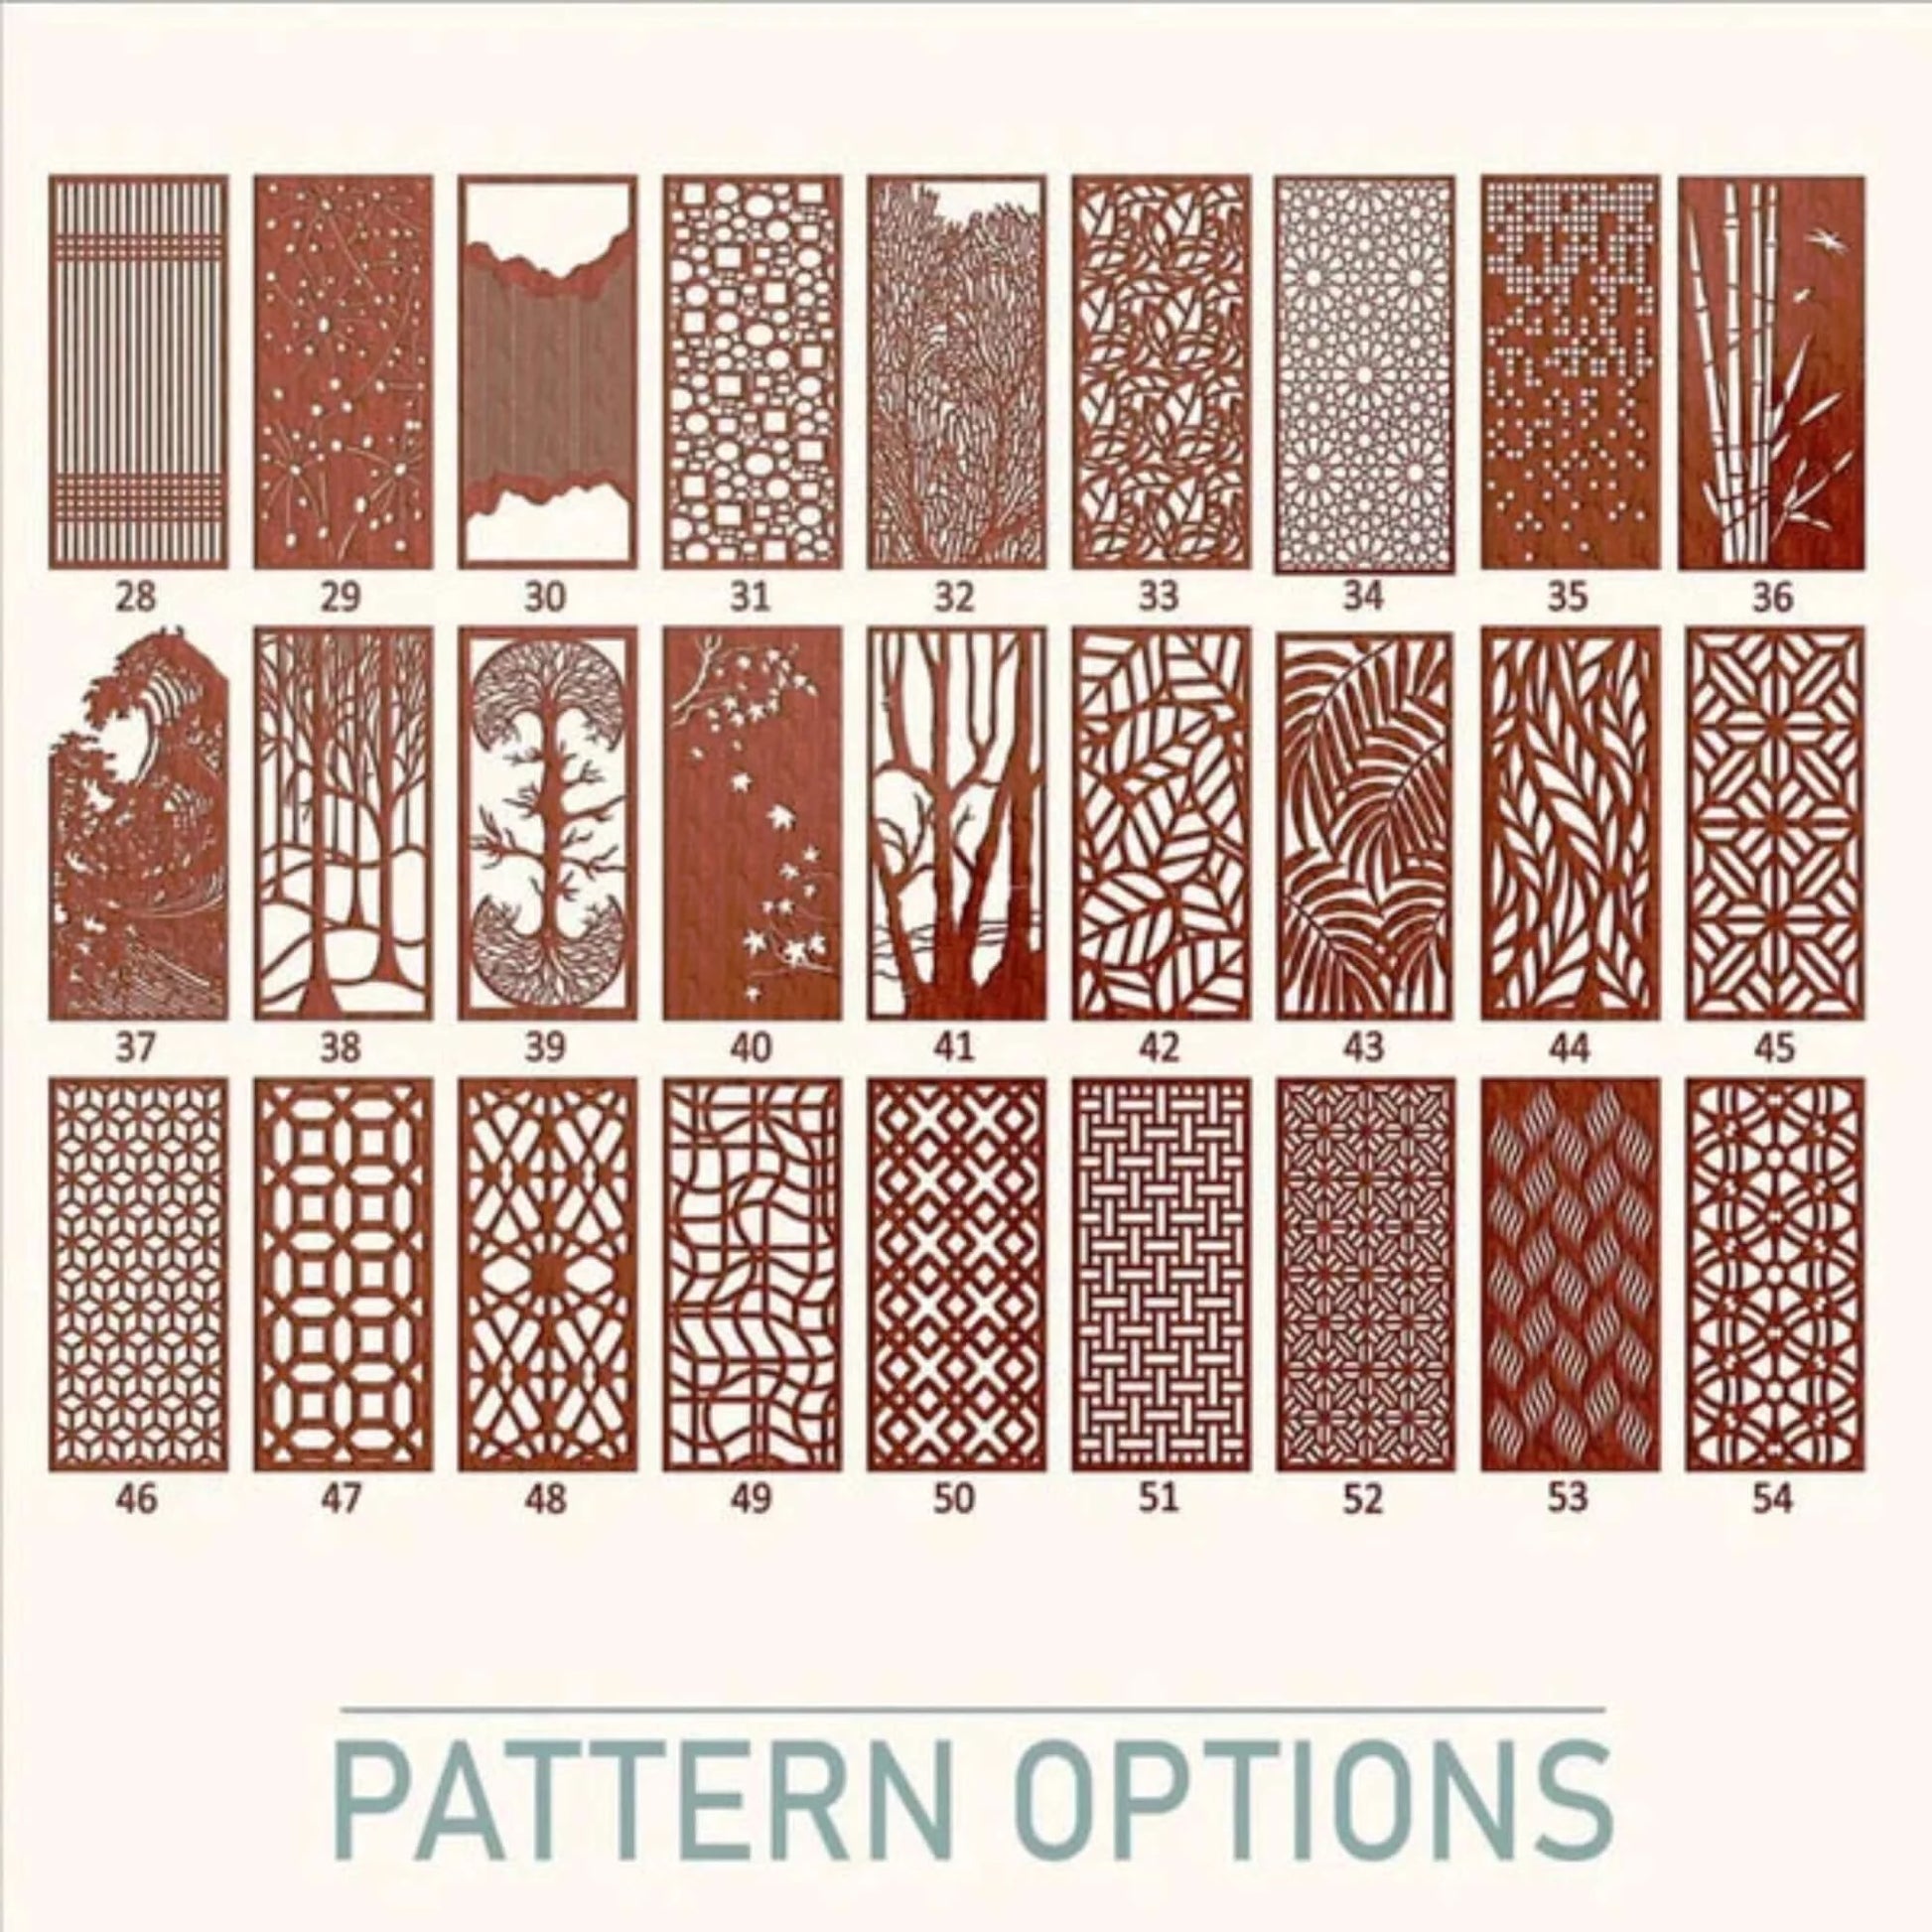 Partition, Room Divider, Custom Divider Screen, Panels, Privacy Screen, Room Divider, Custom Panels, Free Standing Panels, Decorative room divider, Privacy partitions, Paravent, Mihrab, Islamic panels, Mosque partition, Mosque separator, custom panel, room divider, room dividers, craftivaart, Arc panel, Islamic divider, Islamic design, Masjid divider, mosque panel, Islamic room divider, Arc divider design, arc panel, yoga, meditation, Islamic design